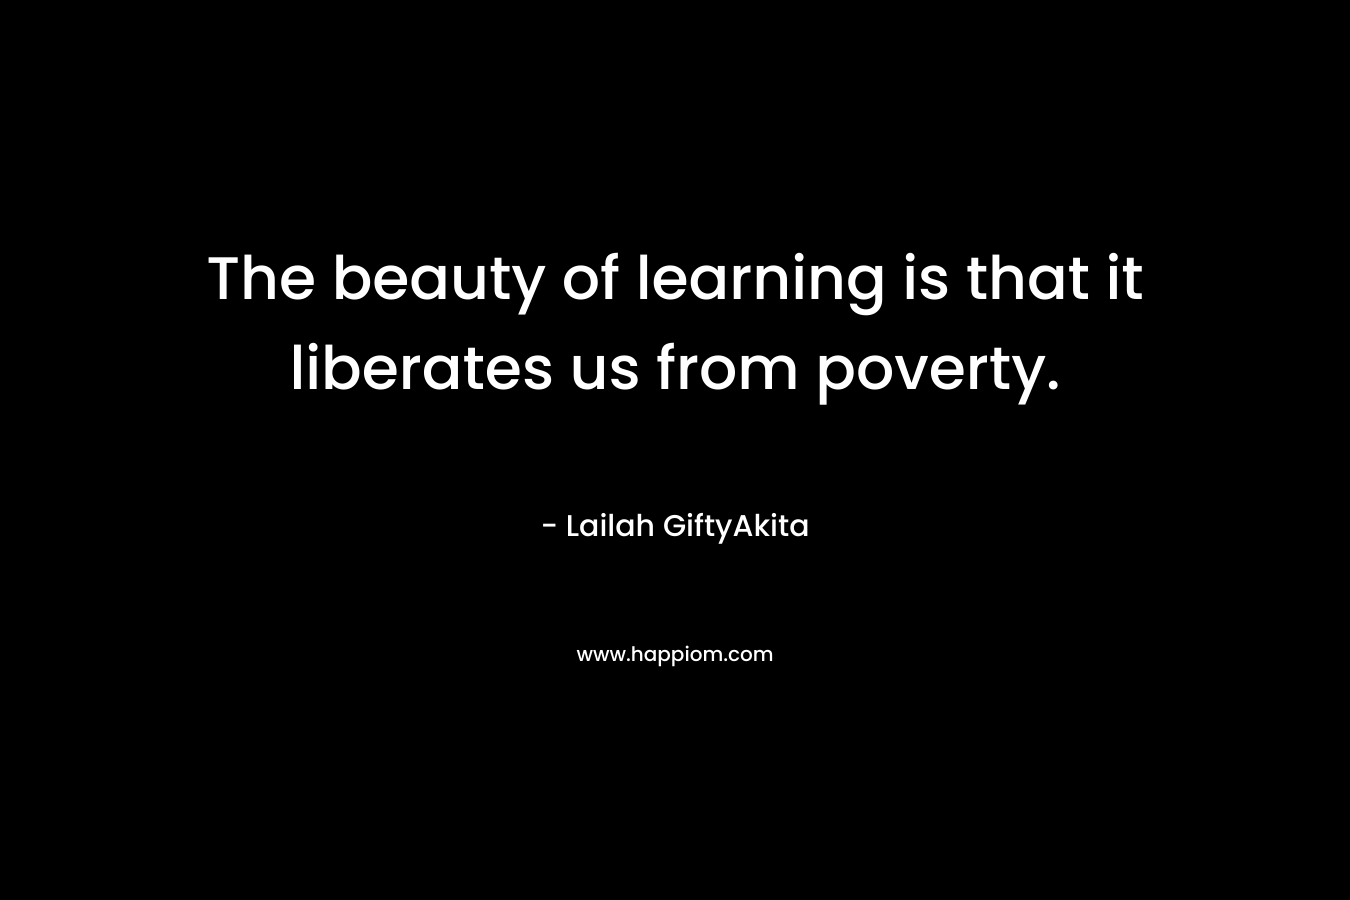 The beauty of learning is that it liberates us from poverty.